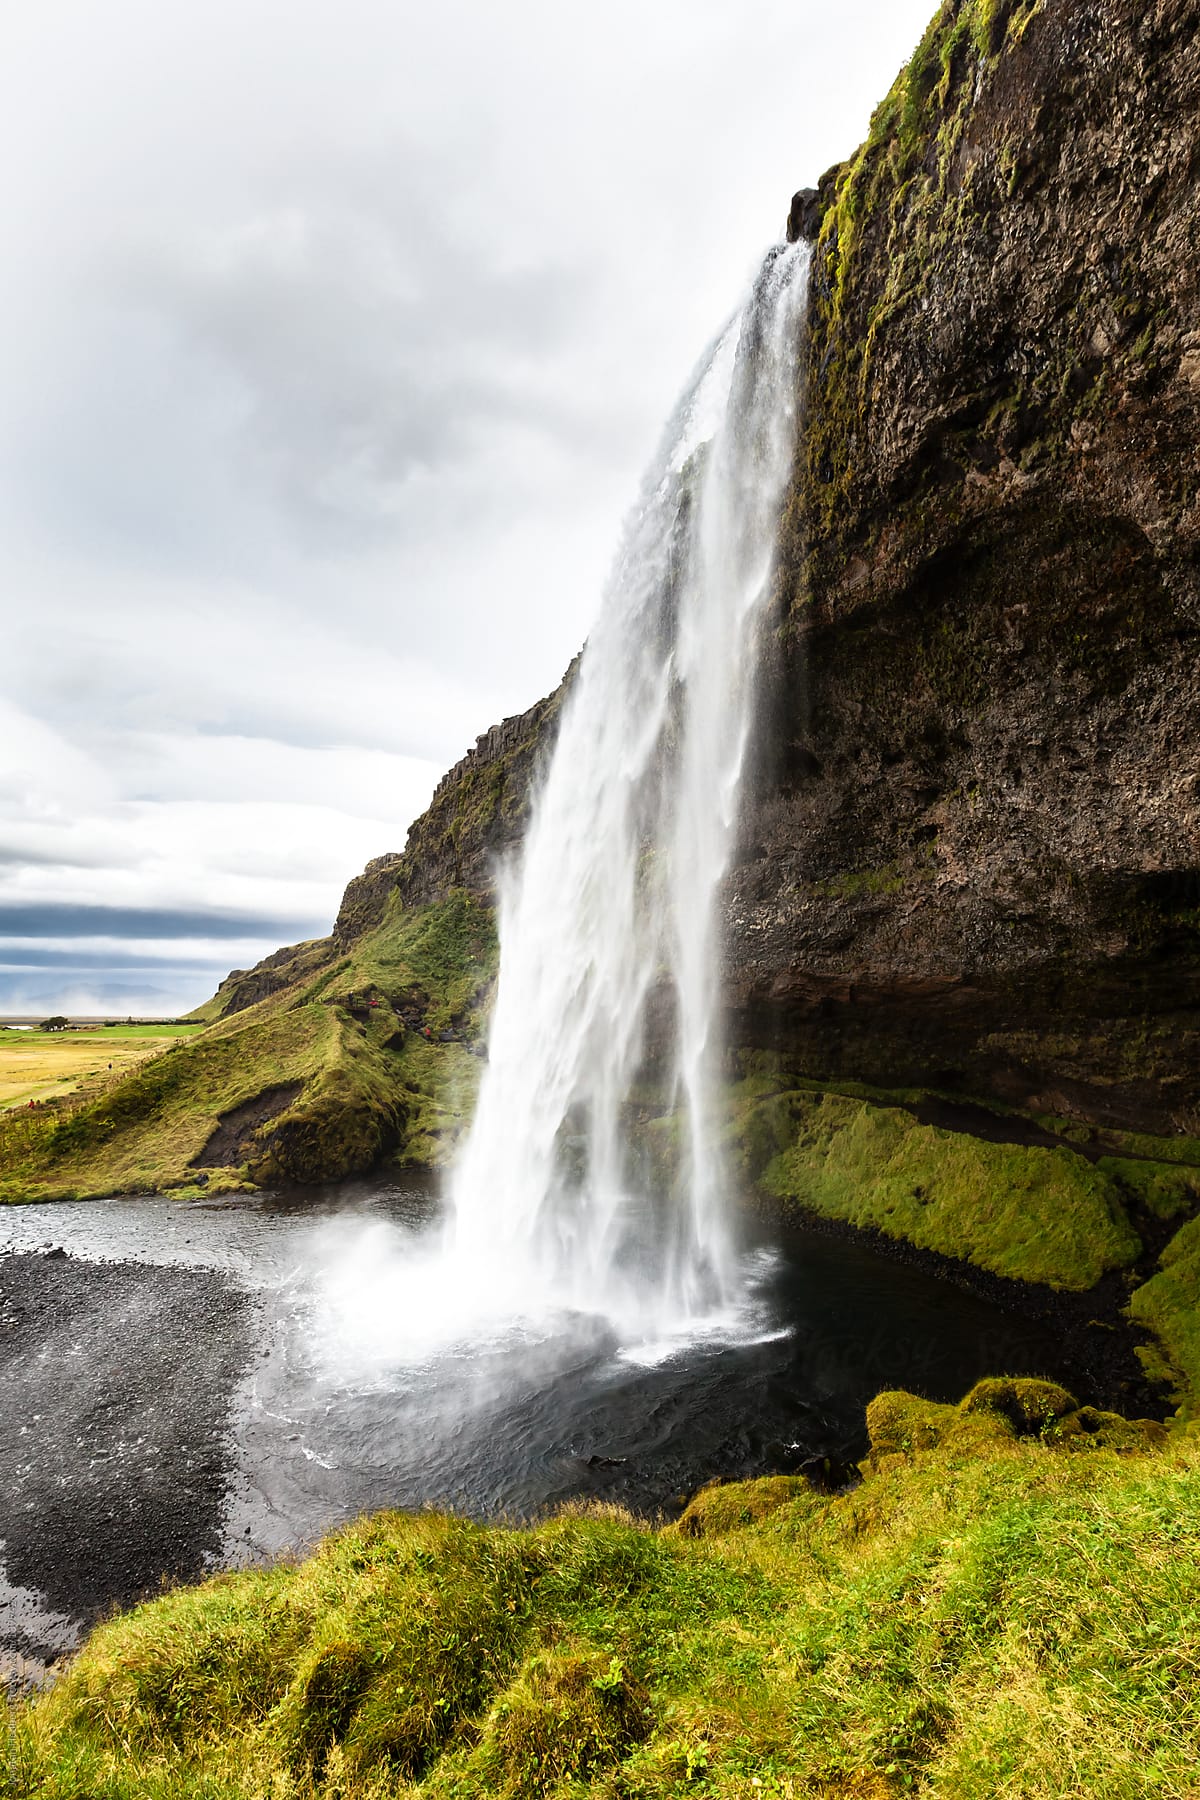 Waterfall in Iceland with heavy rain clouds in the sky